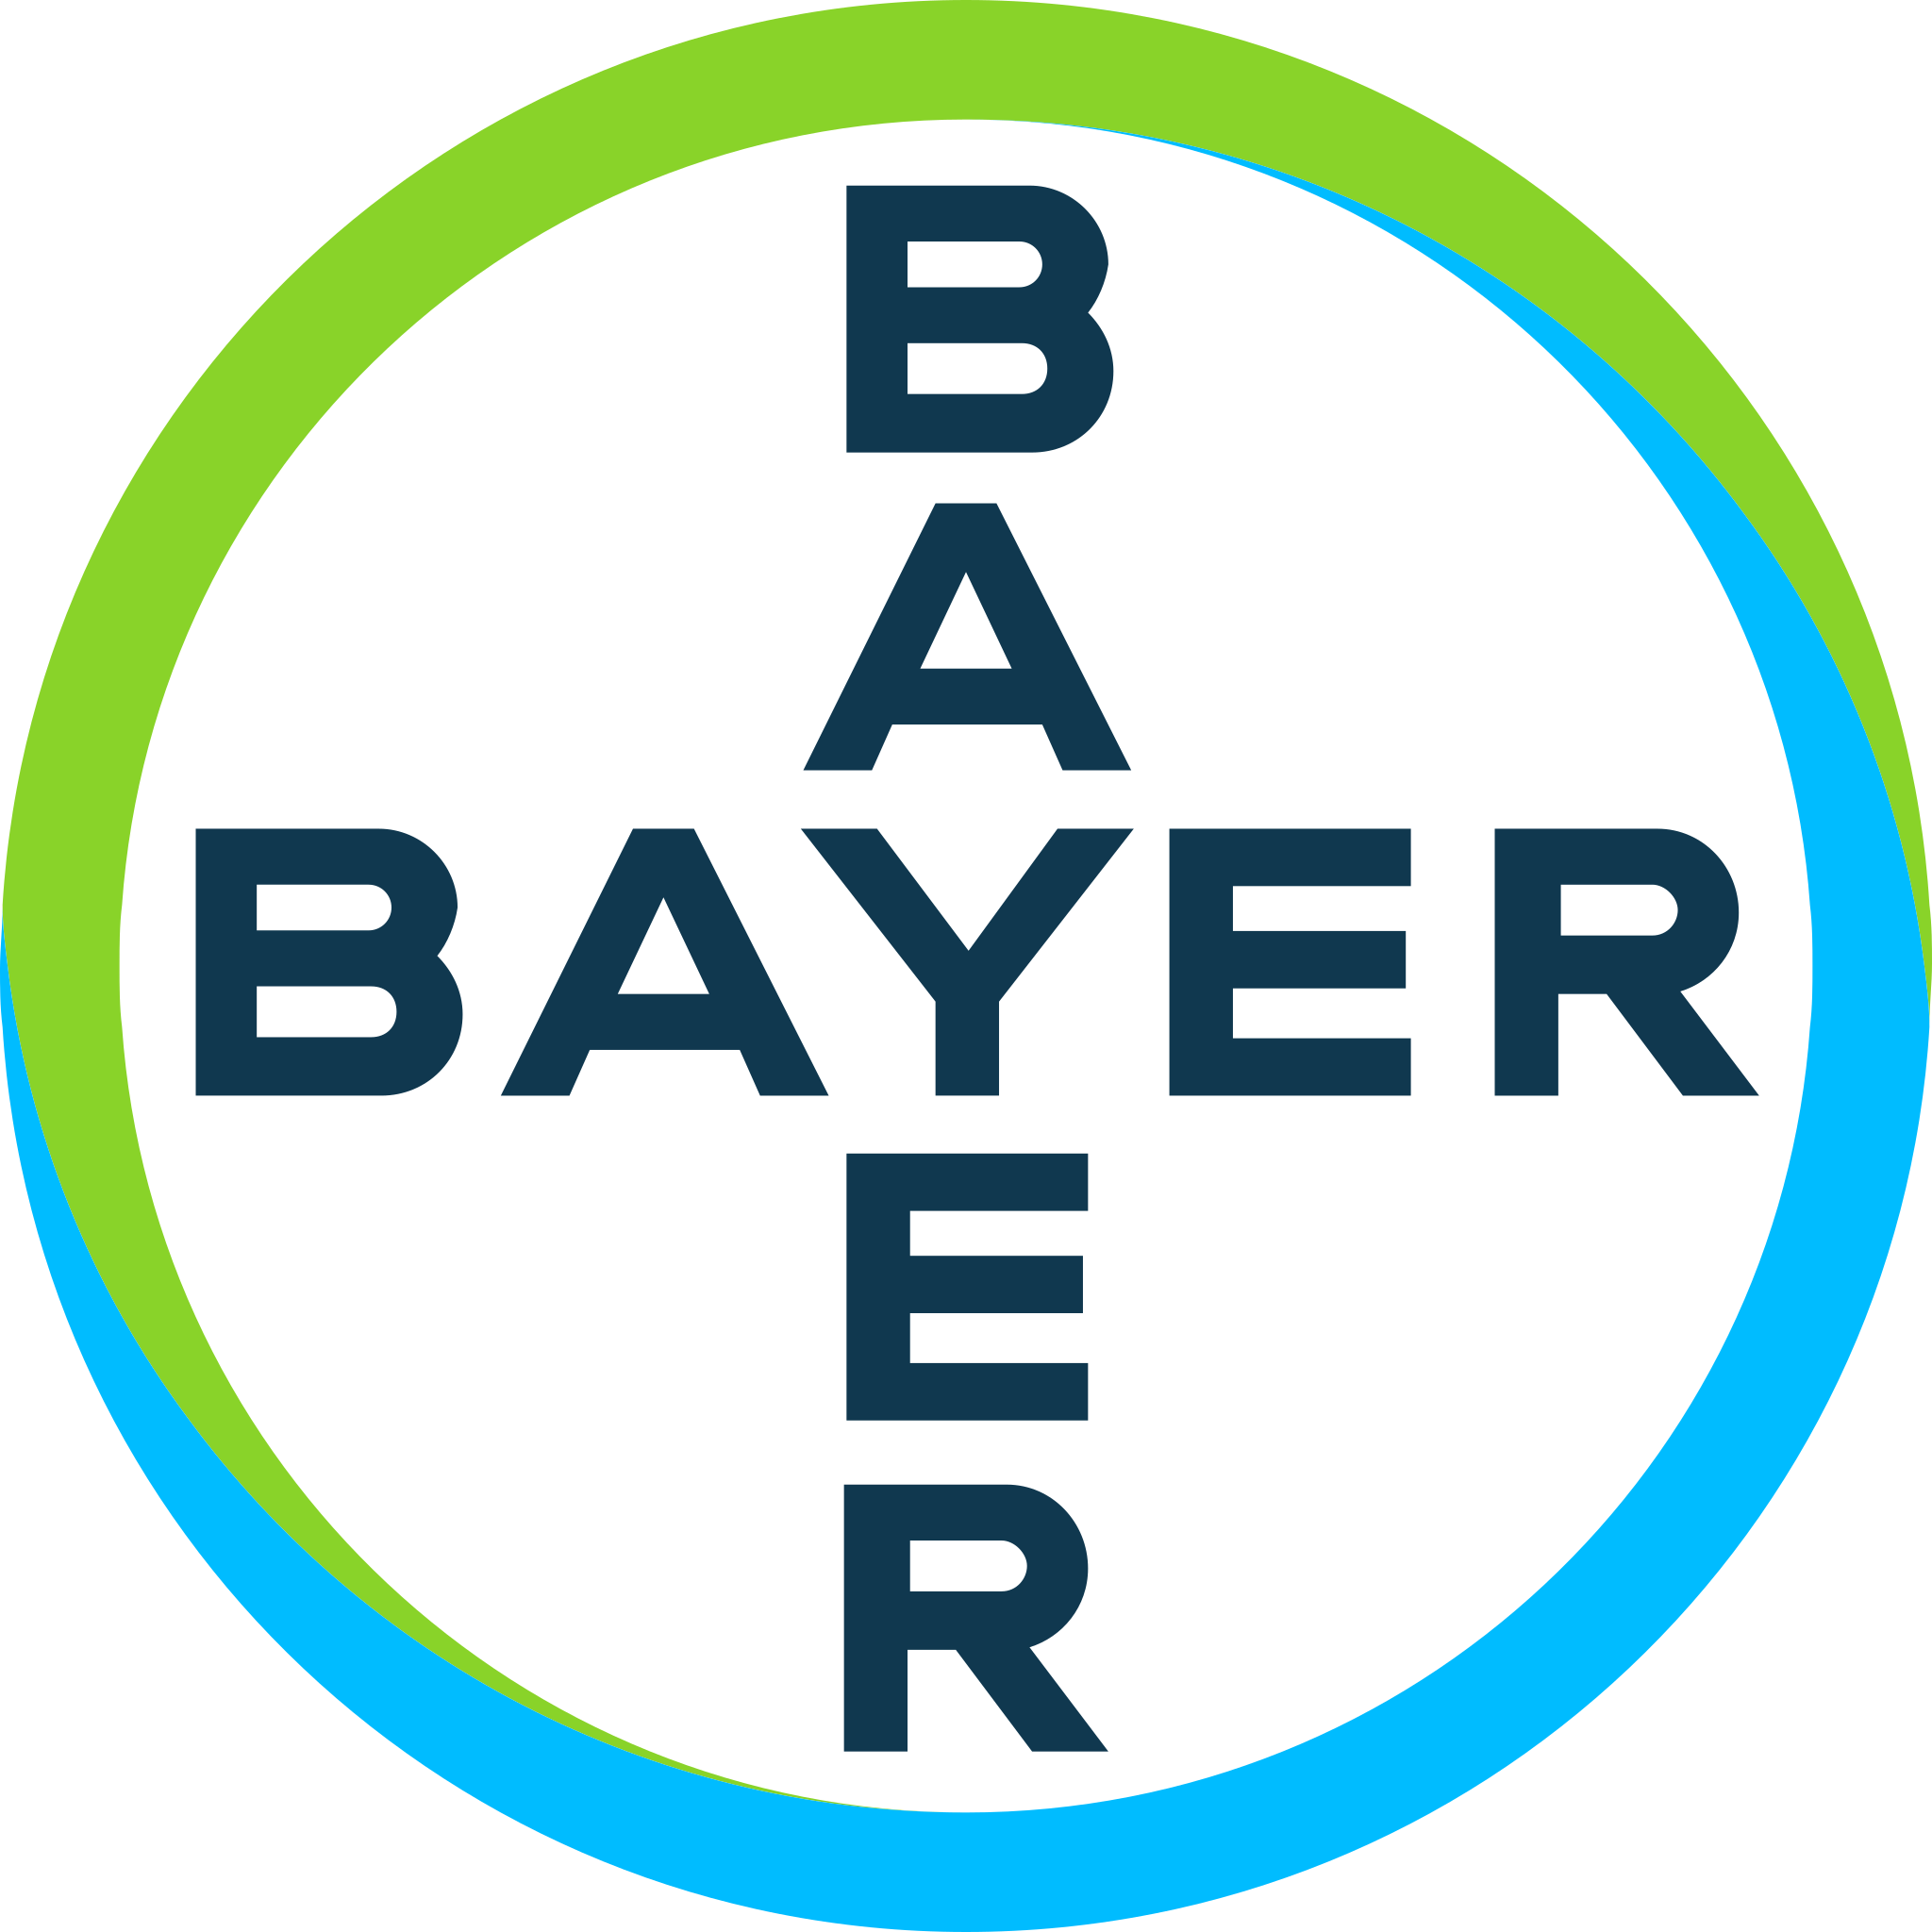 Bayer Pharma logo photo, technology, CRM, Data, Business Consulting, Growth, digital transformation, customer experience